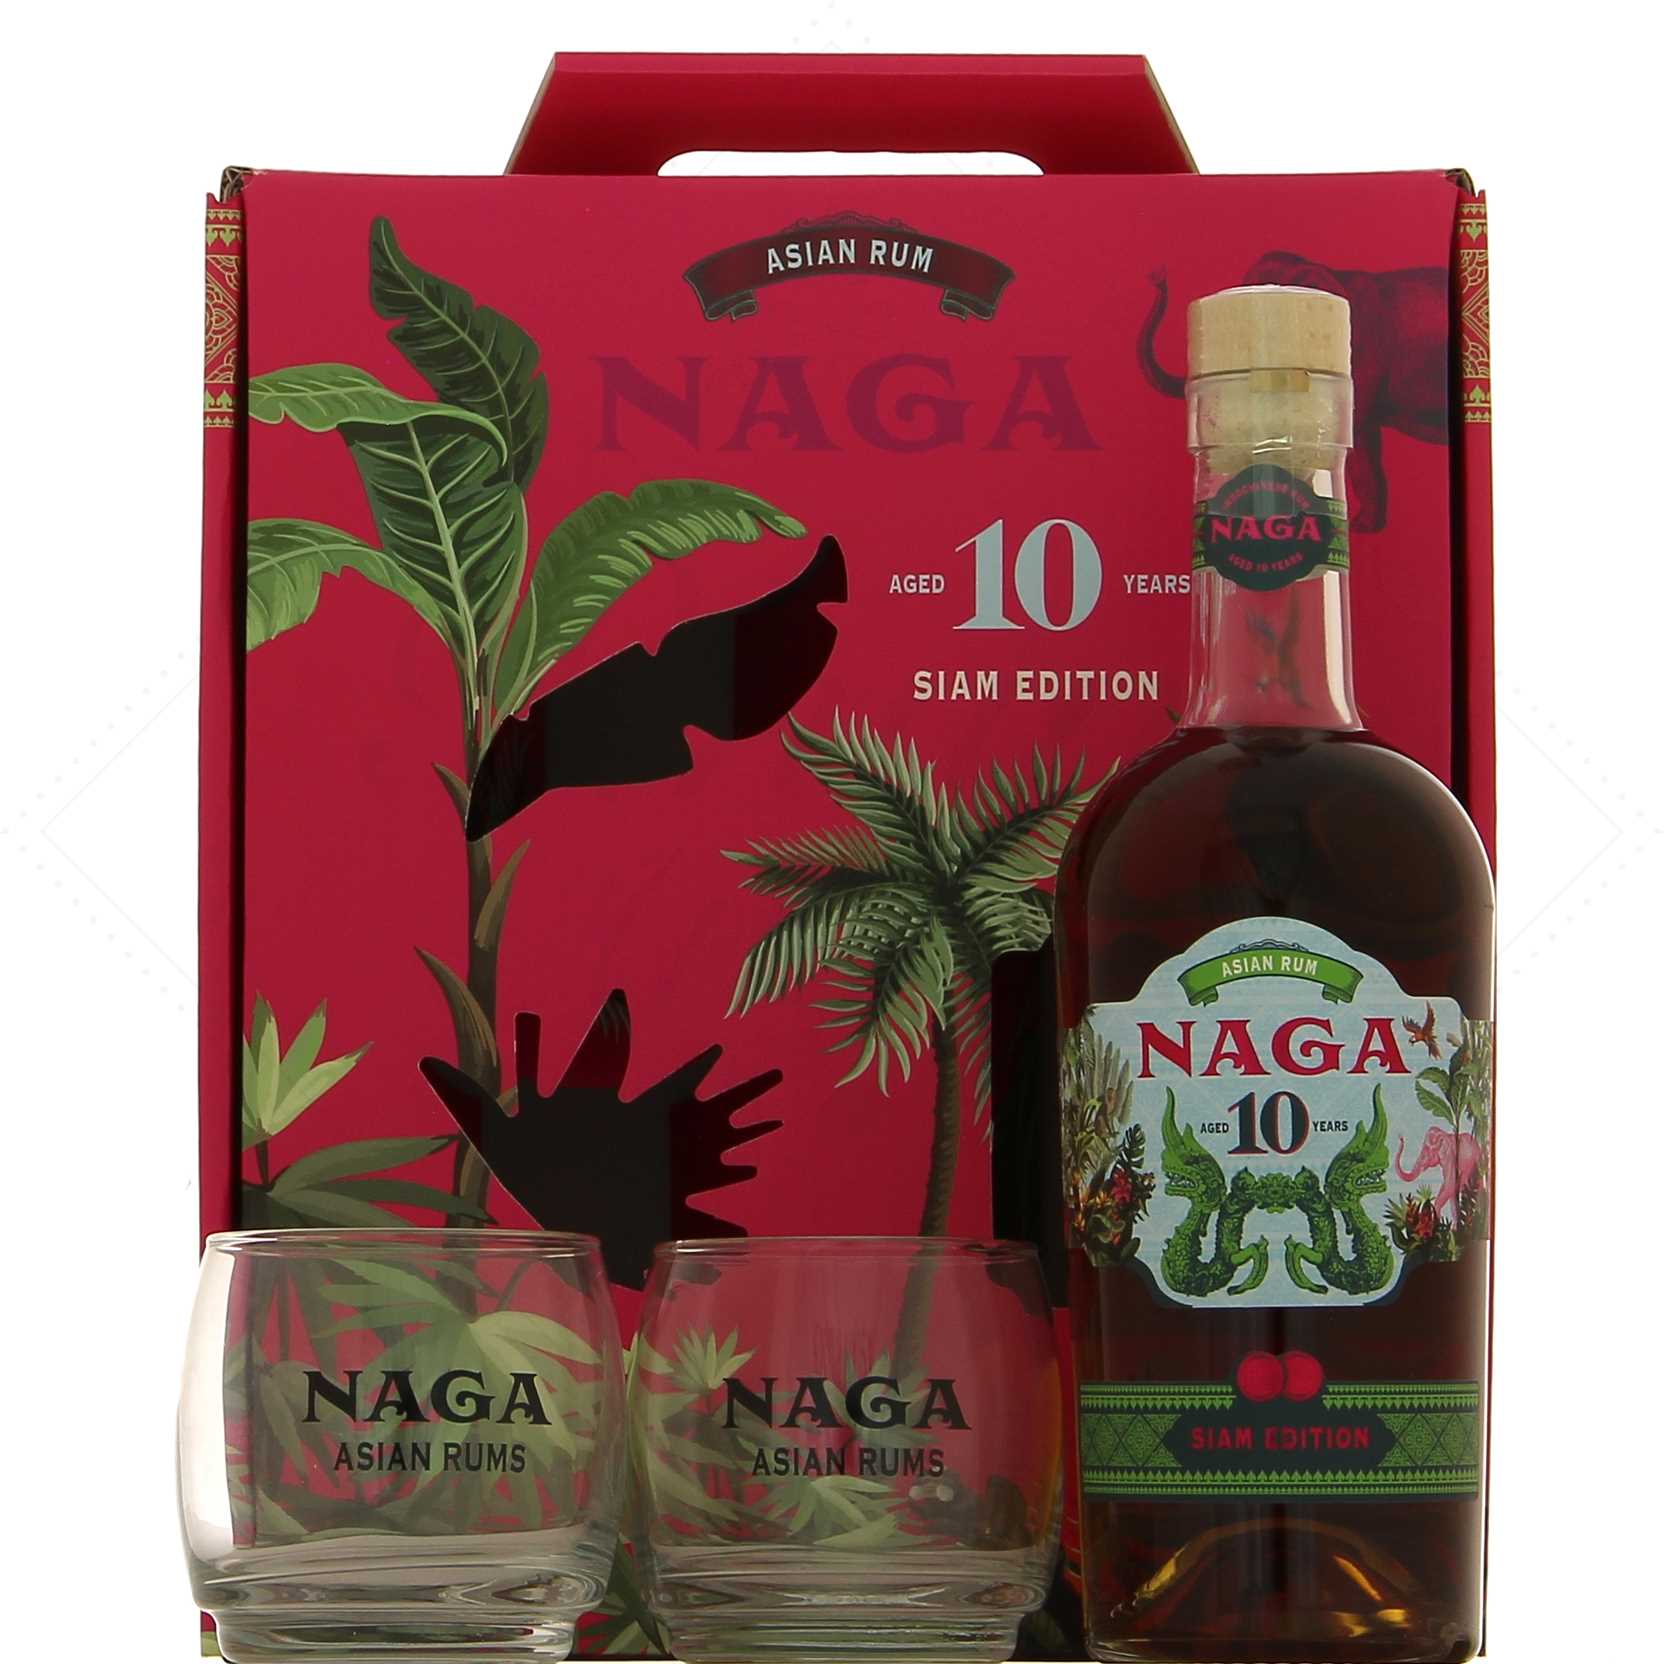 Naga 10 Years Old Asian Rum SIAM EDITION 40% Vol. 0,7l in Giftbox with 2 glasses